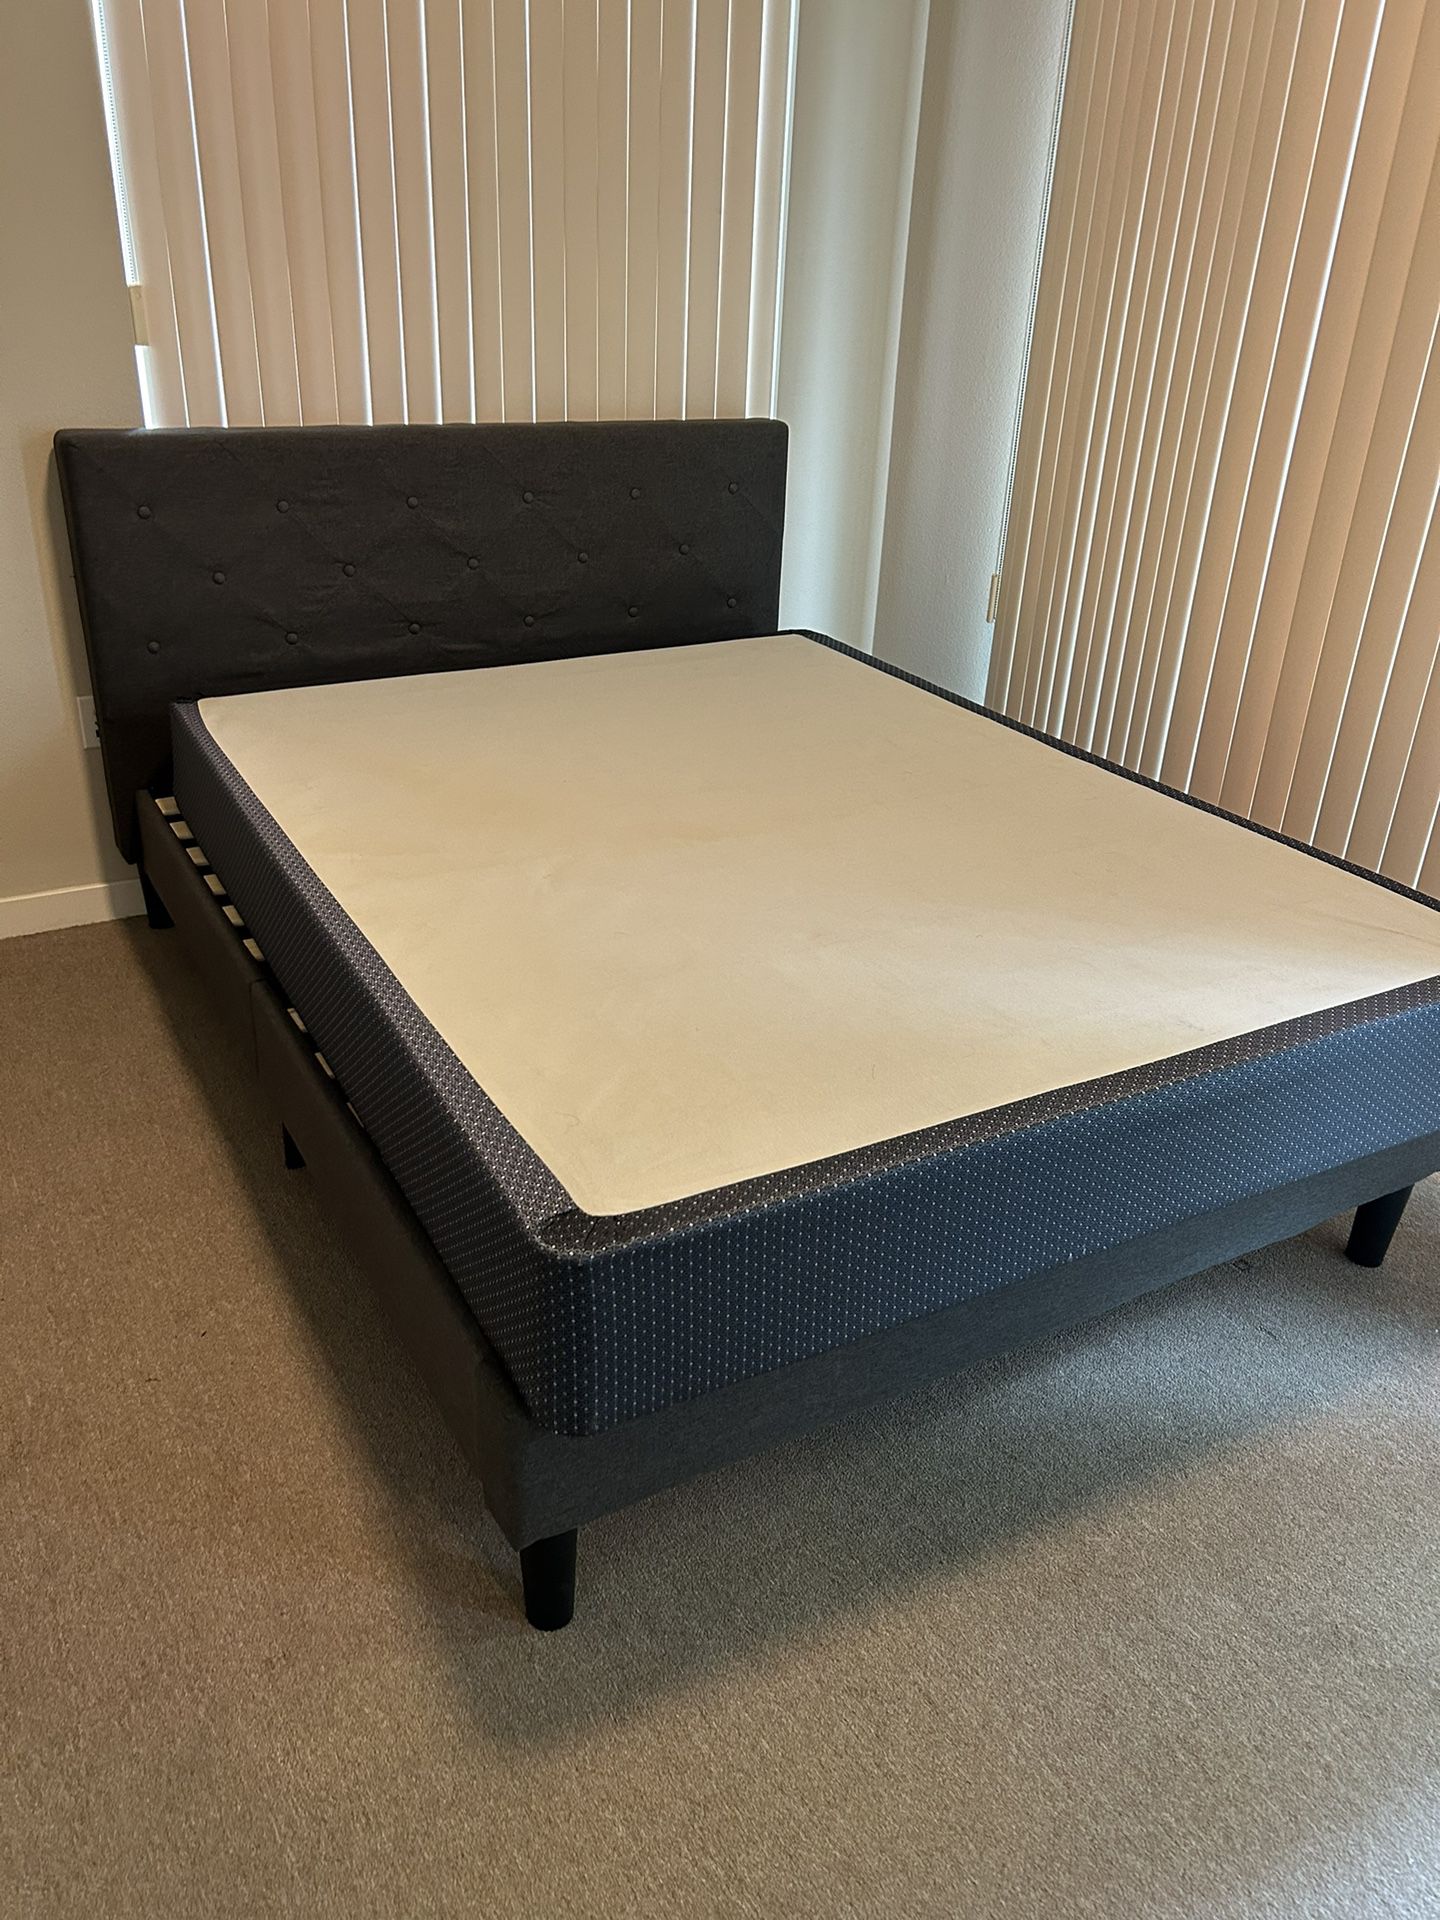 Queen Size Bed + Box